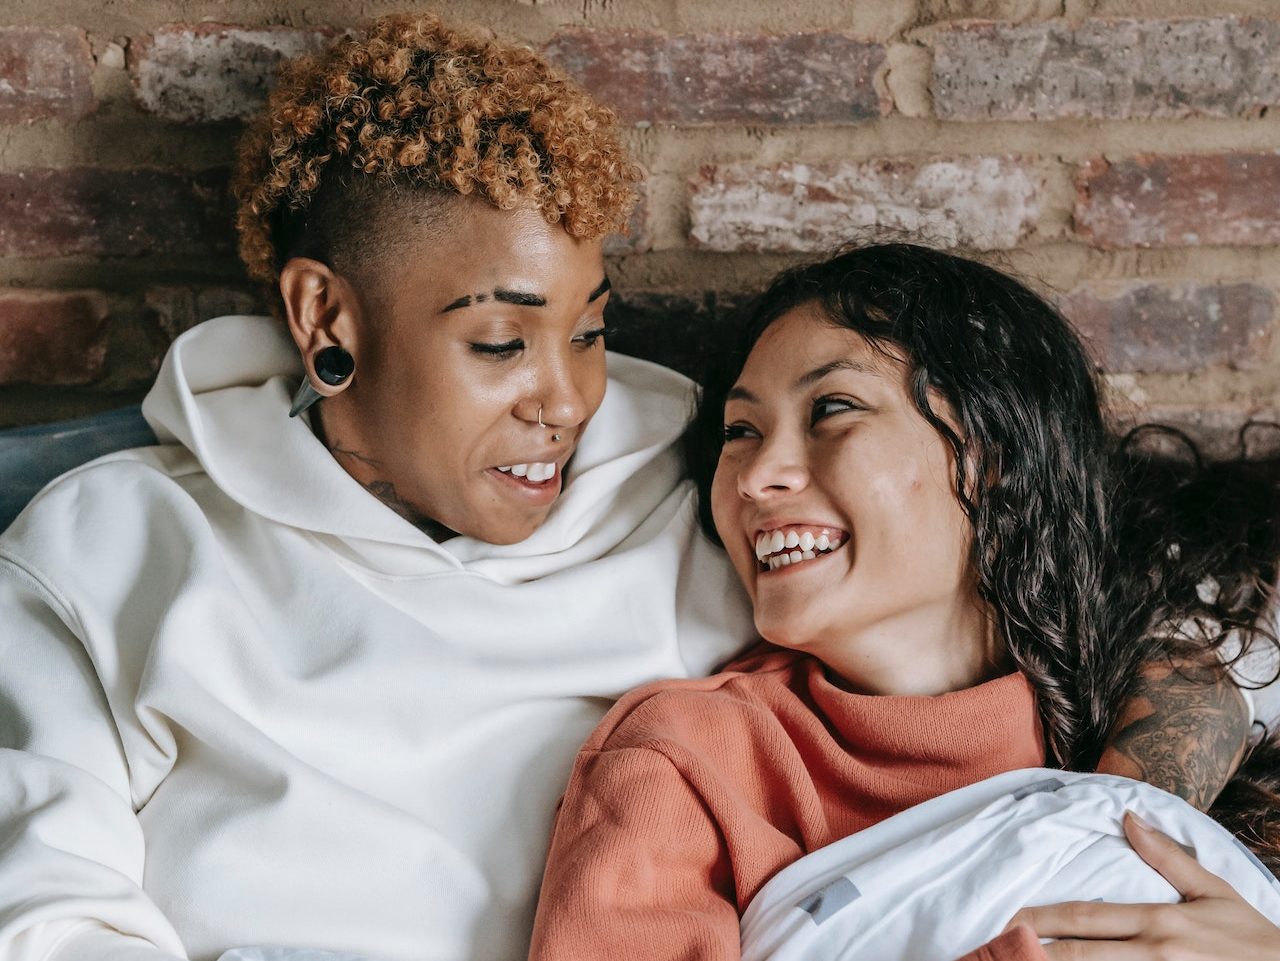 Two women smiling at each other, their relationship has improved after LGBTQ counseling.